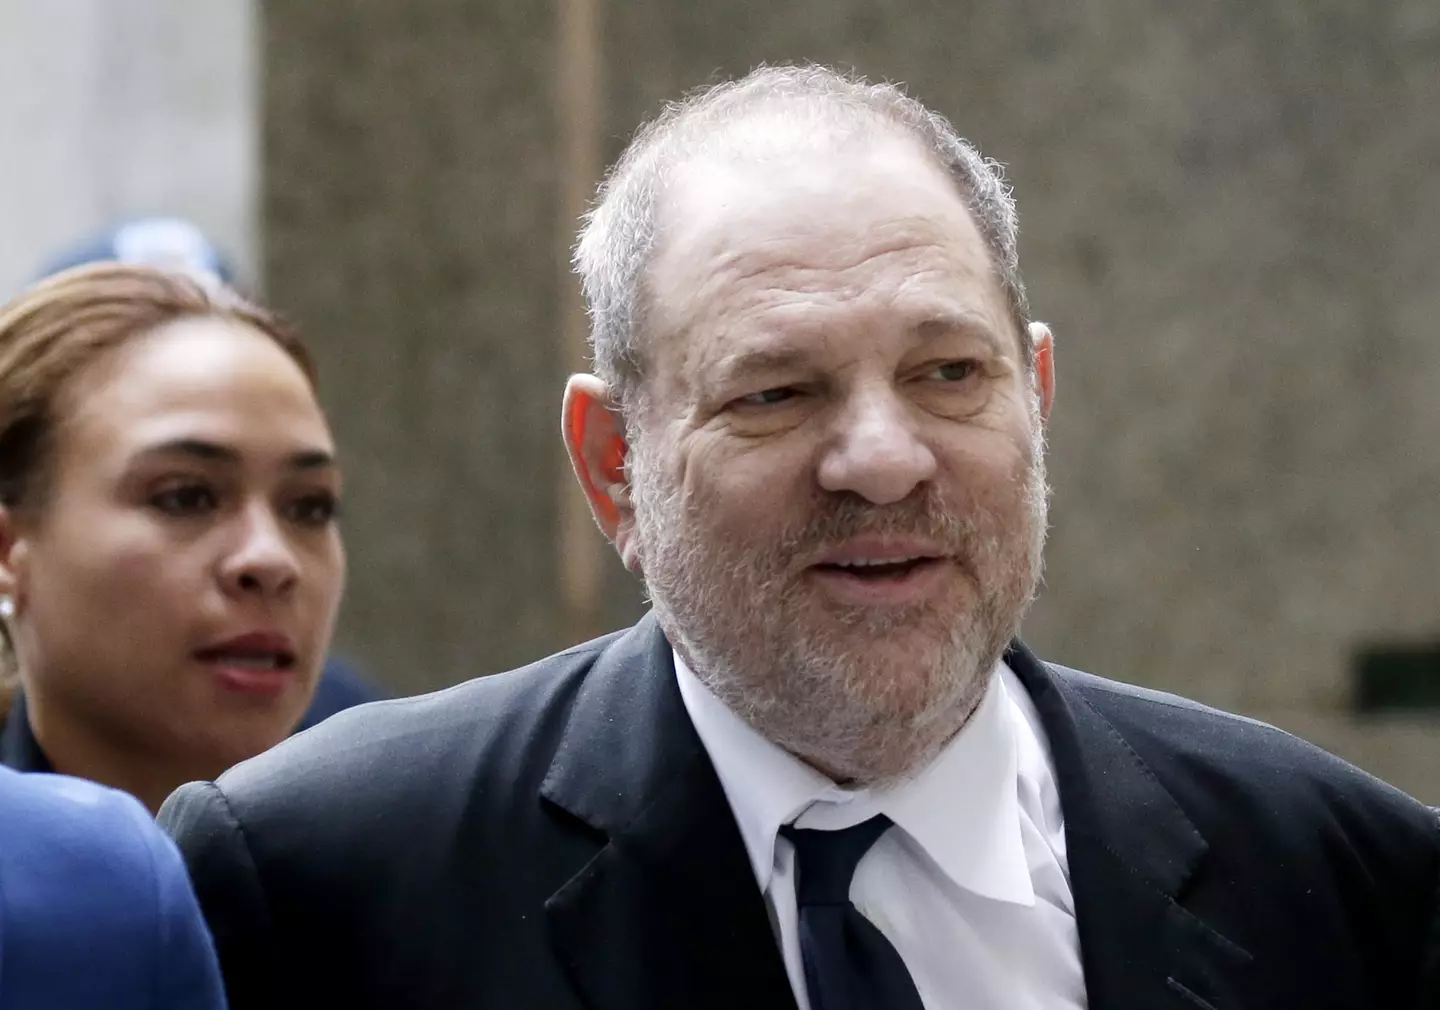 Weinstein is appealing his Los Angeles conviction with a new legal team.